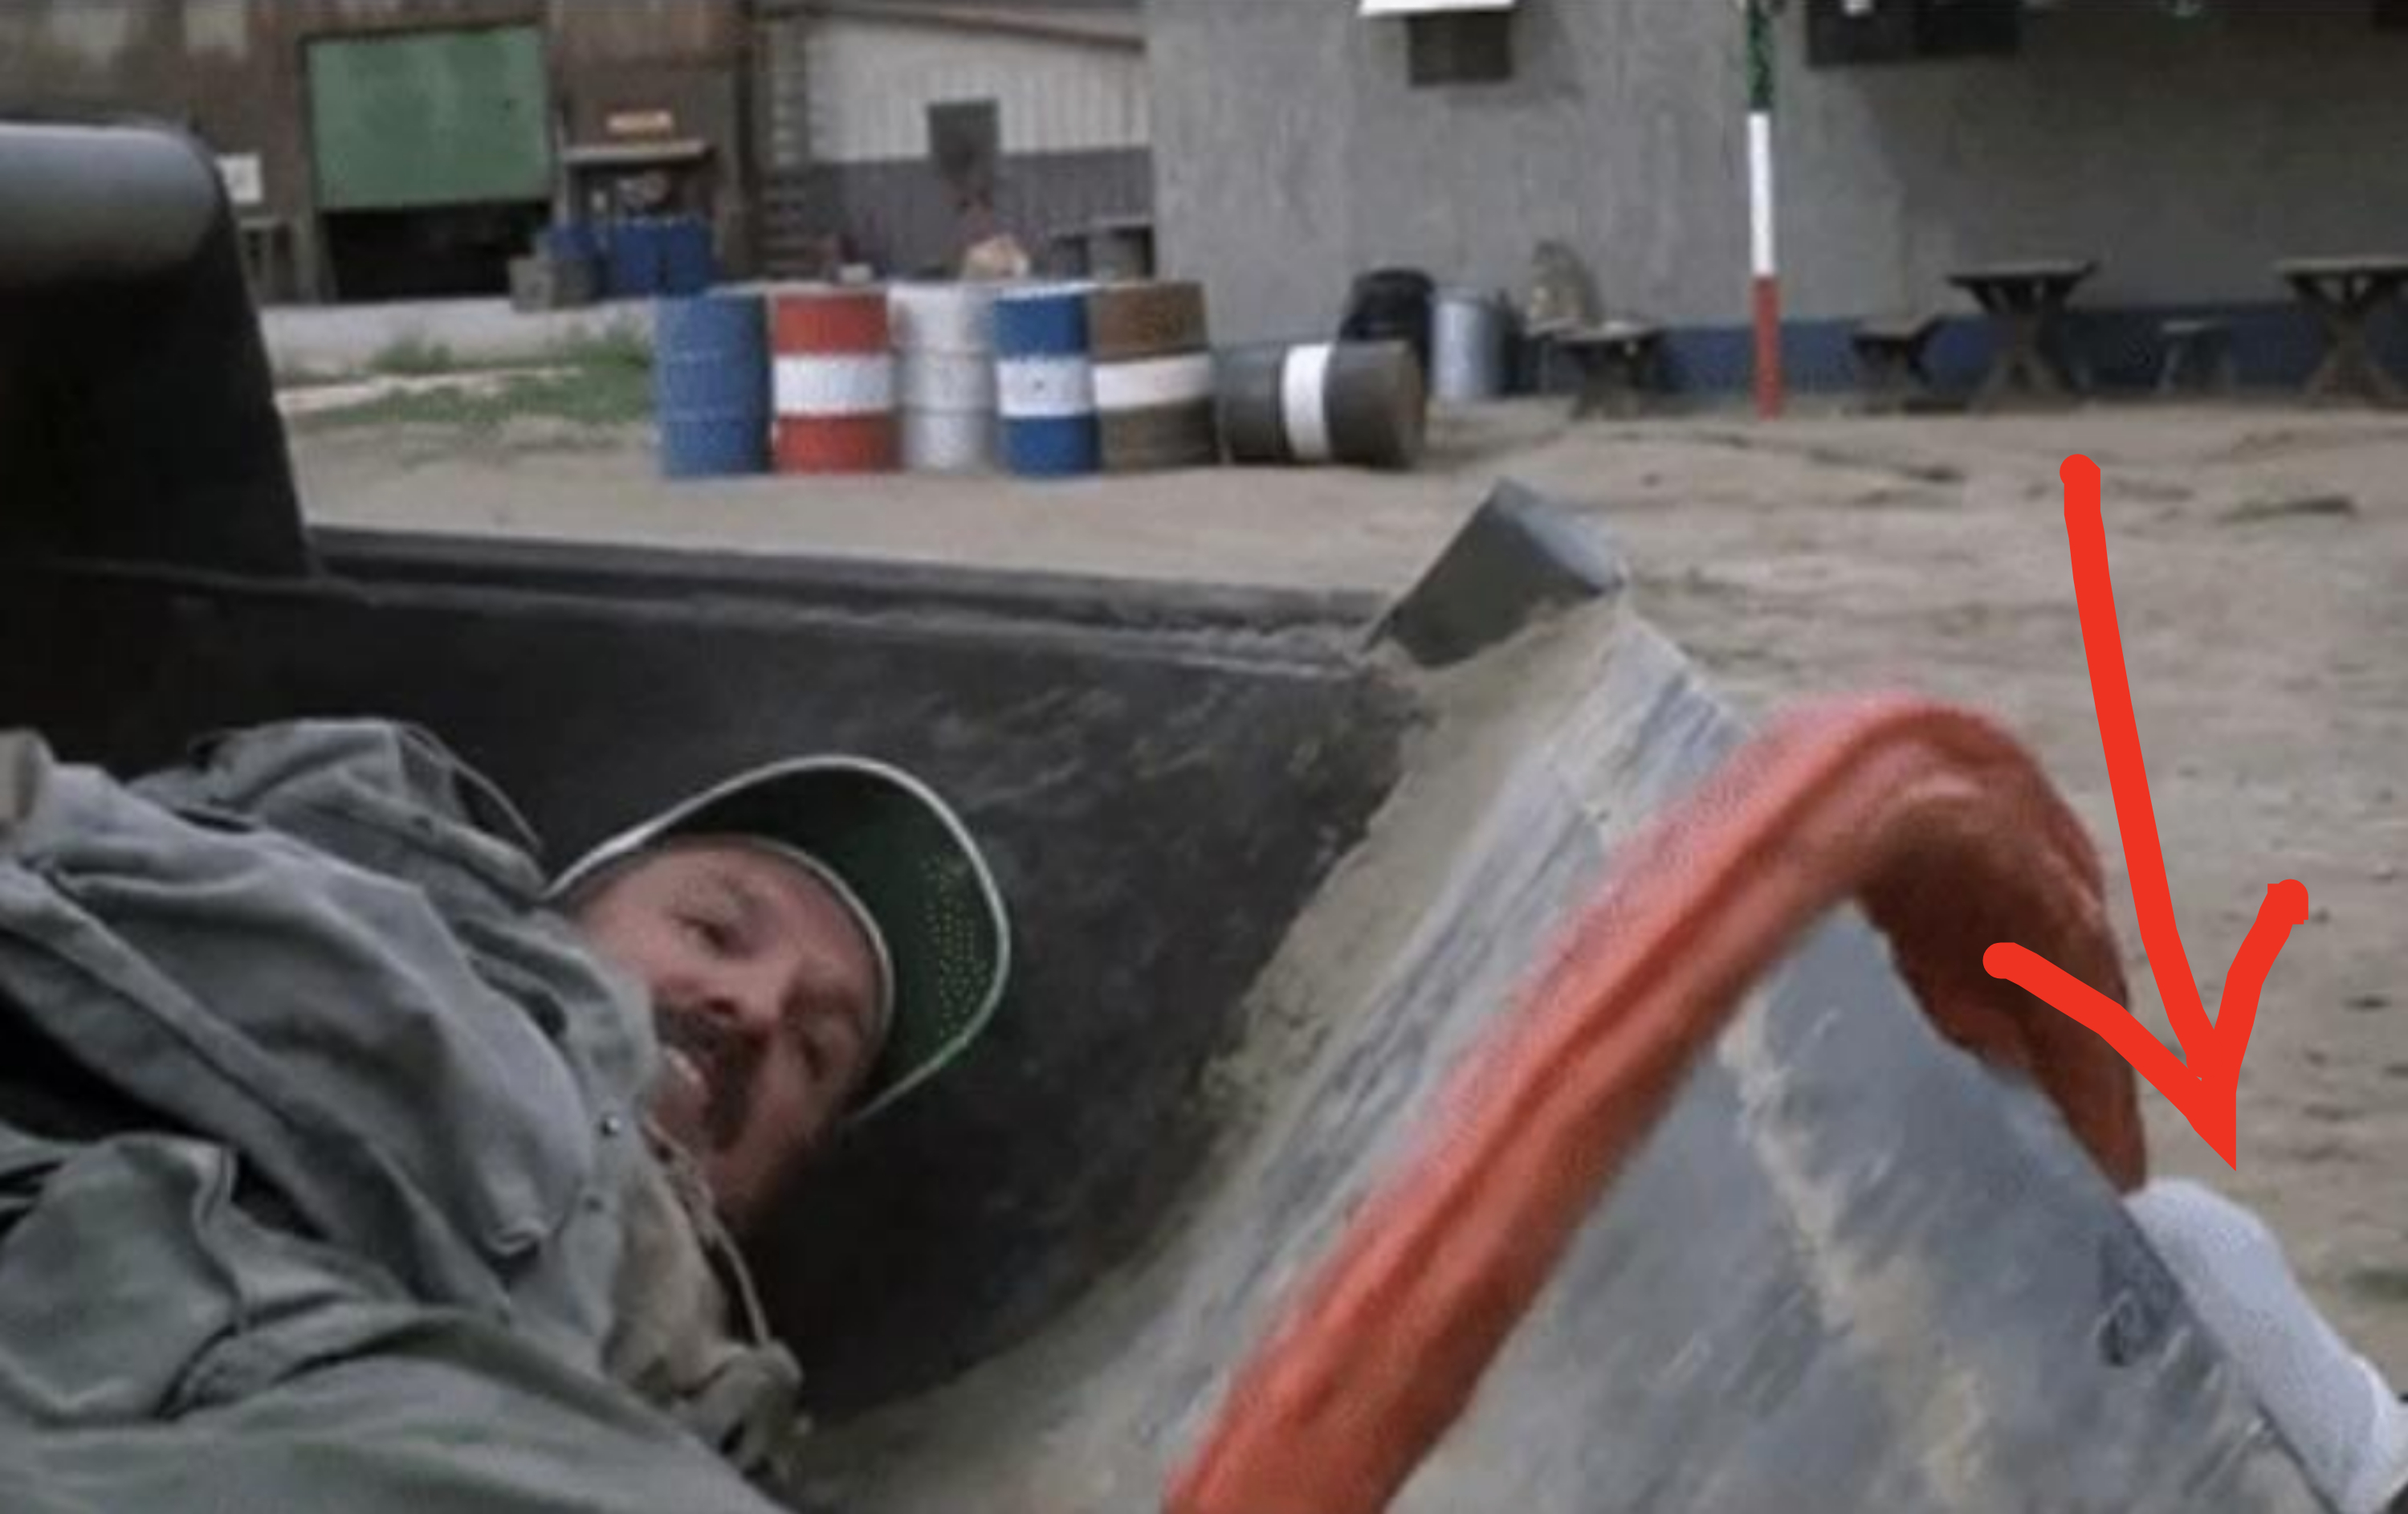 A person&#x27;s hand in the frame in &quot;Tremors 2&quot;